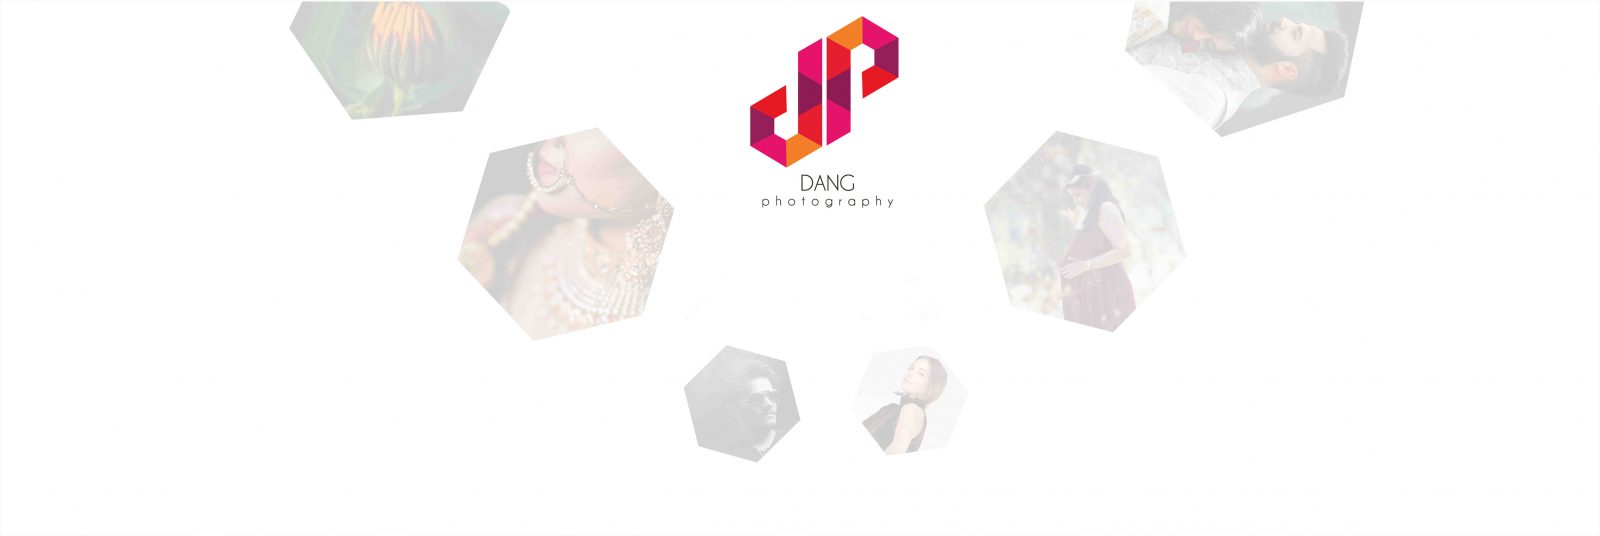 Dang photography|Photographer|Event Services